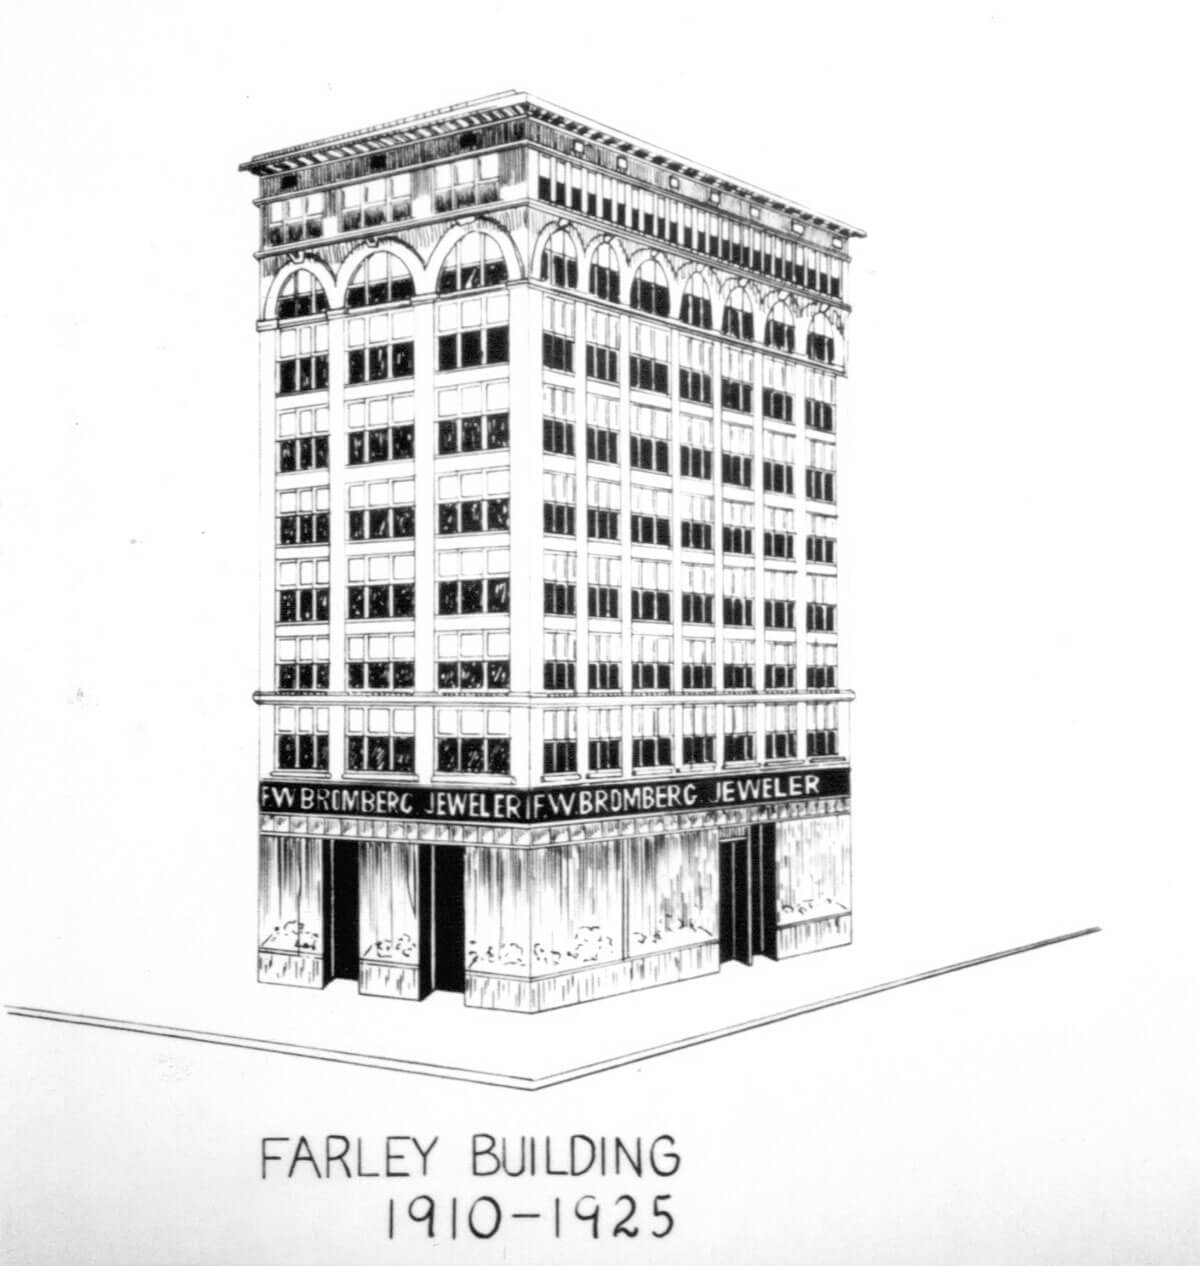 illustration of the Farley building